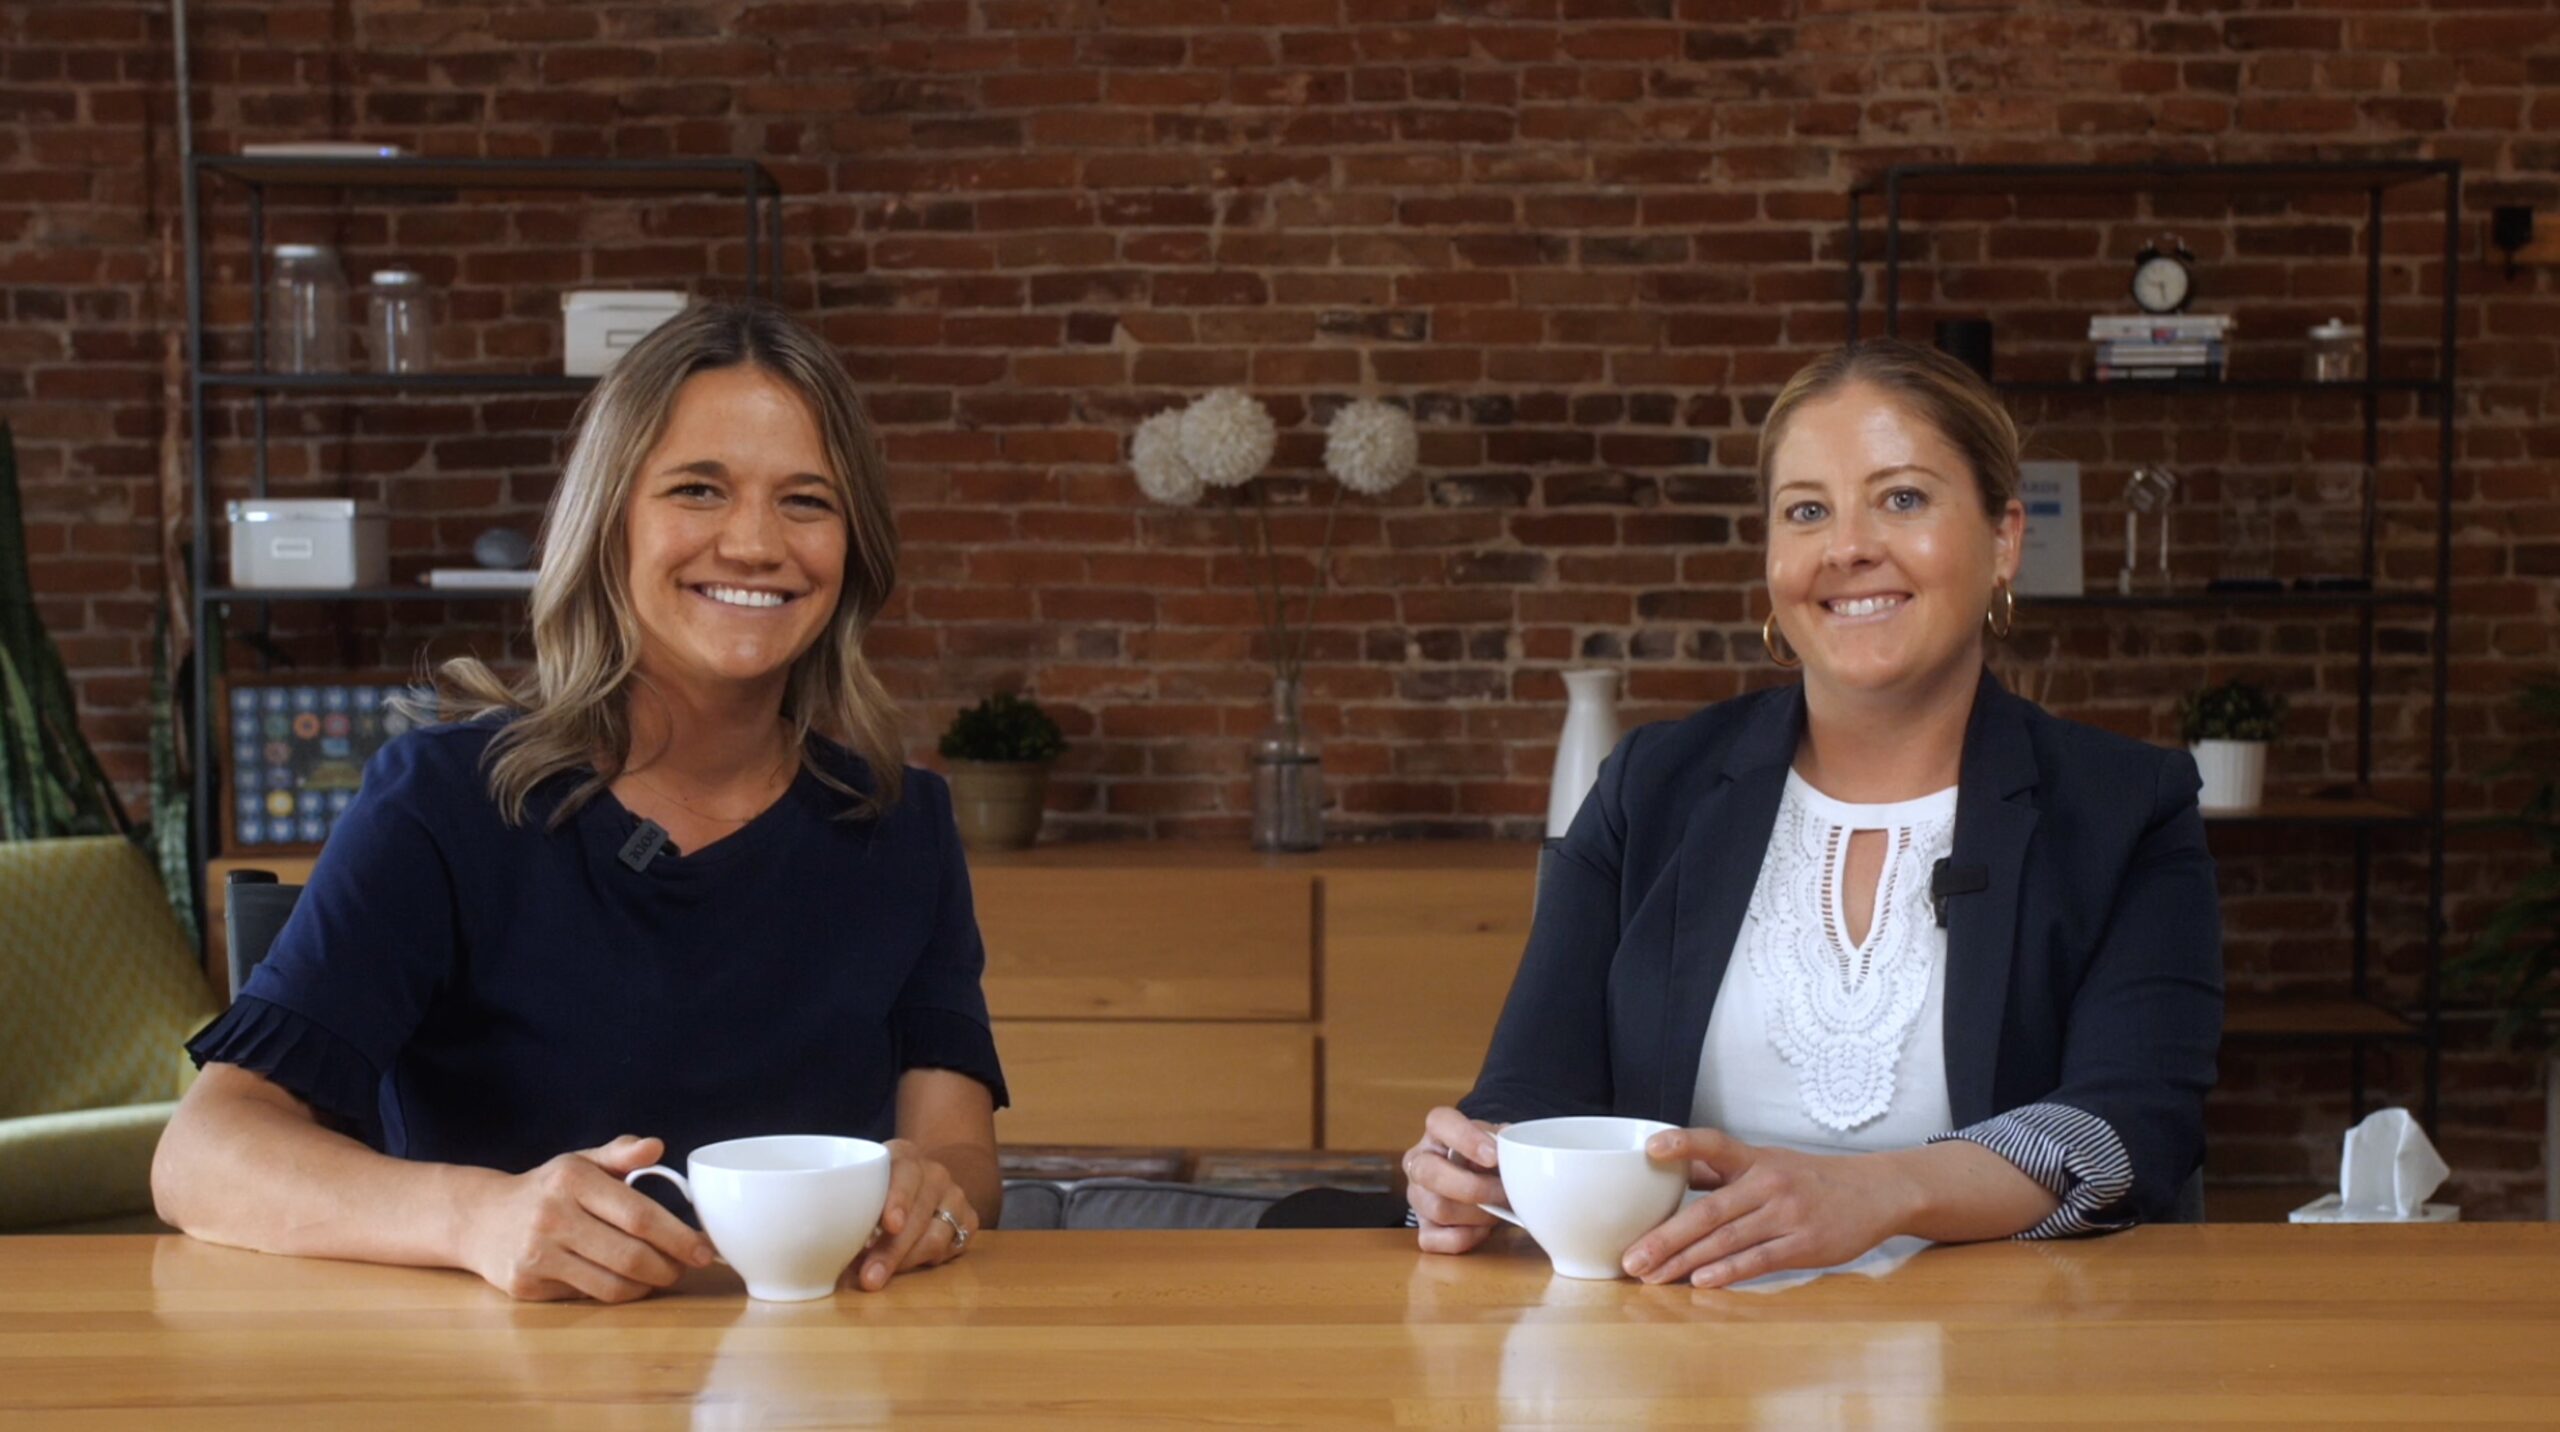 Thumbnail for Q1 Market Update Video featuring Natalie Froland and Amy Aldridge